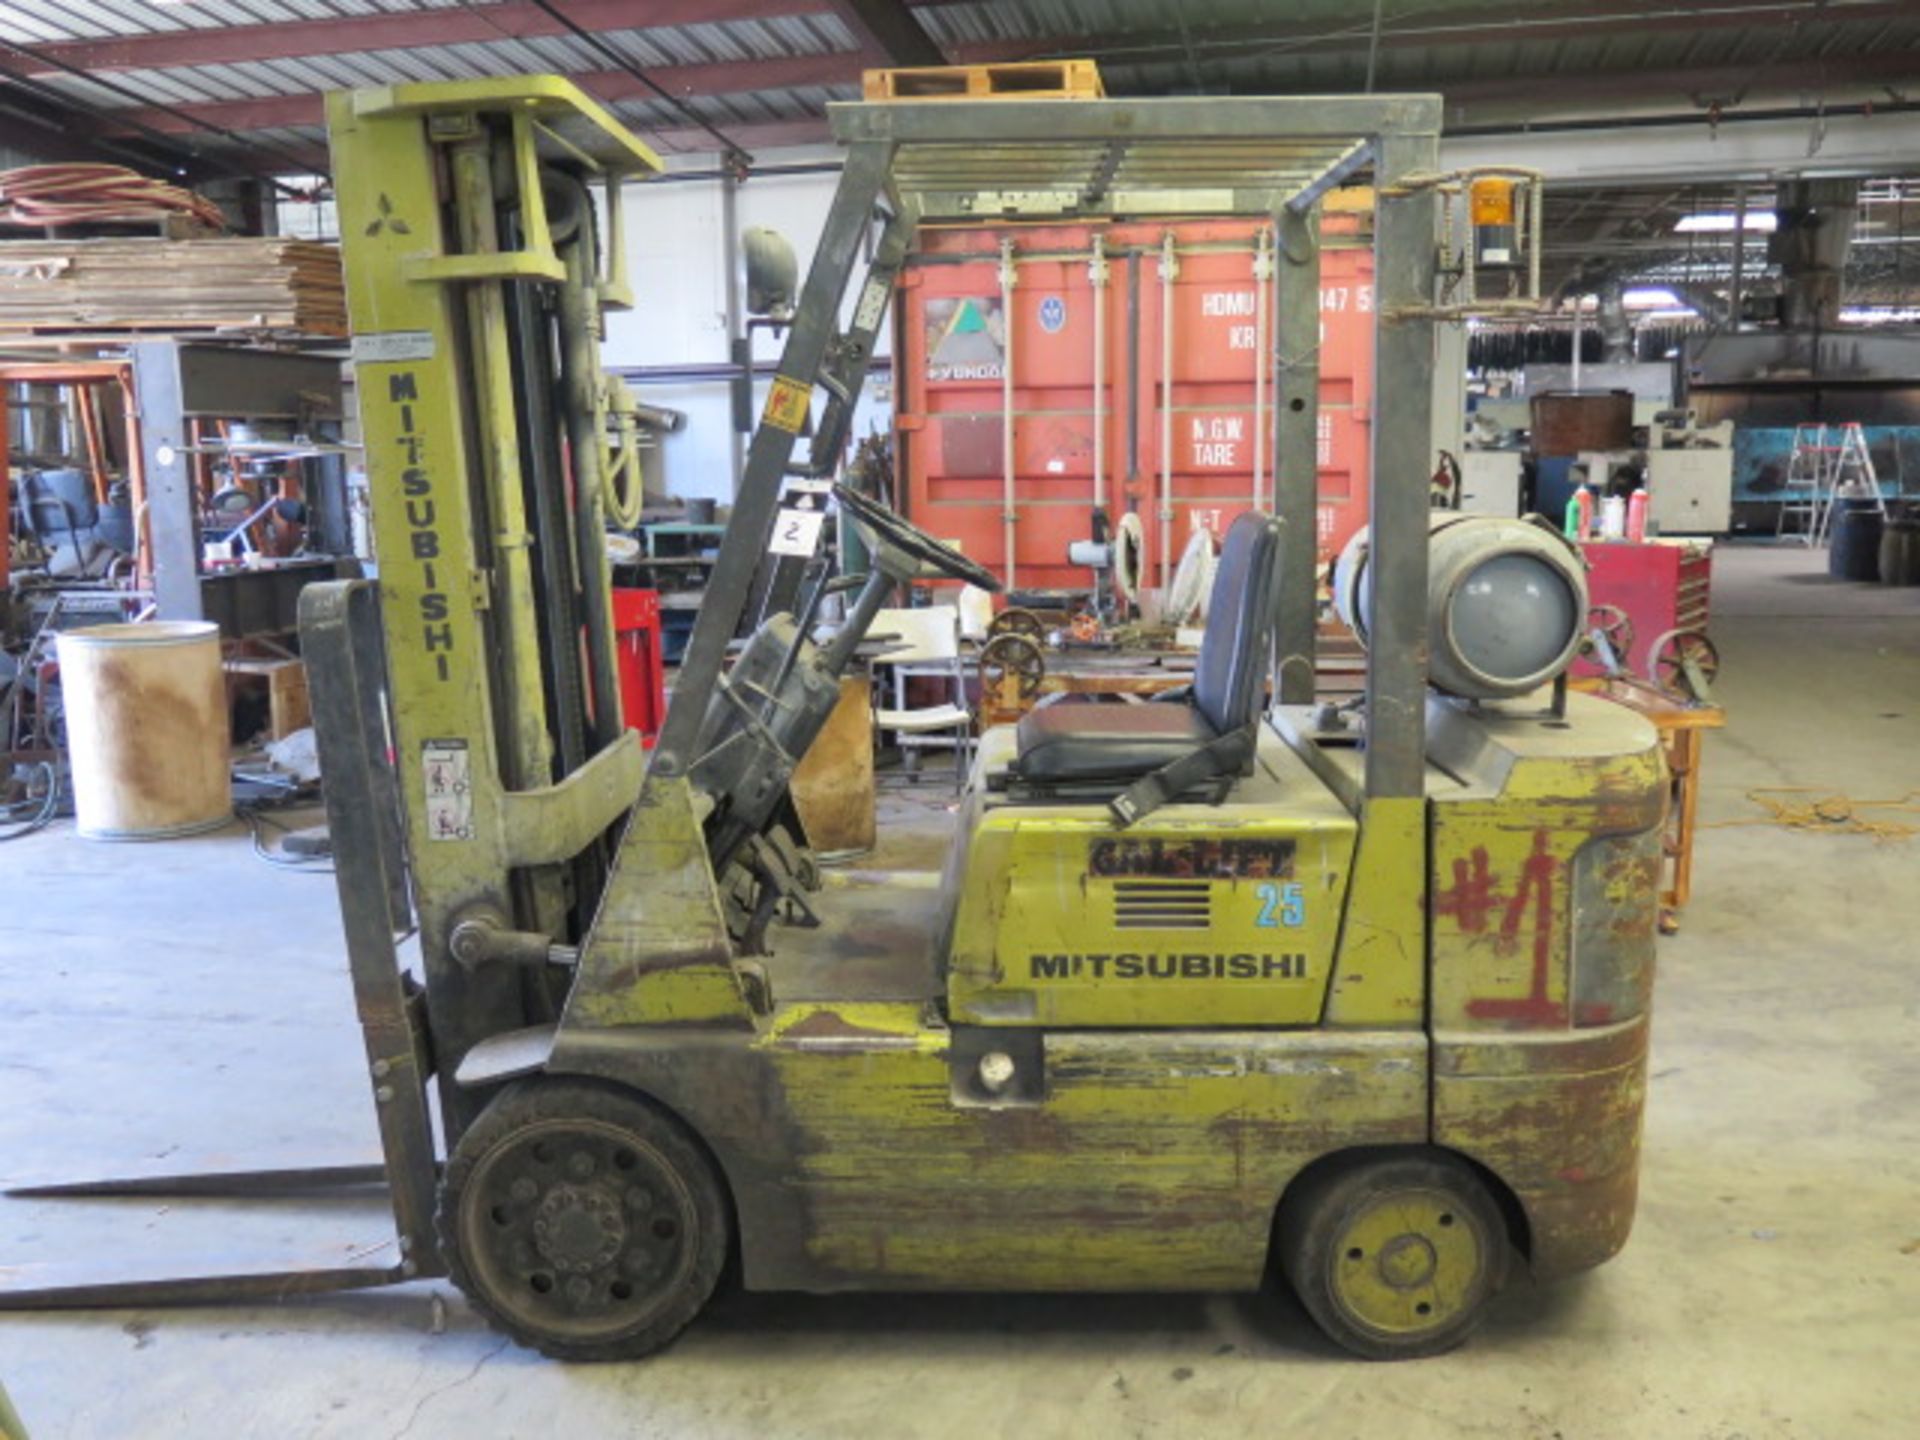 Mitsubishi FGC25 5000 Lb Cap LPG Forklift s/n AF62A-53032 w/ 3-Stage, 189” Lift Height, SOLD AS IS